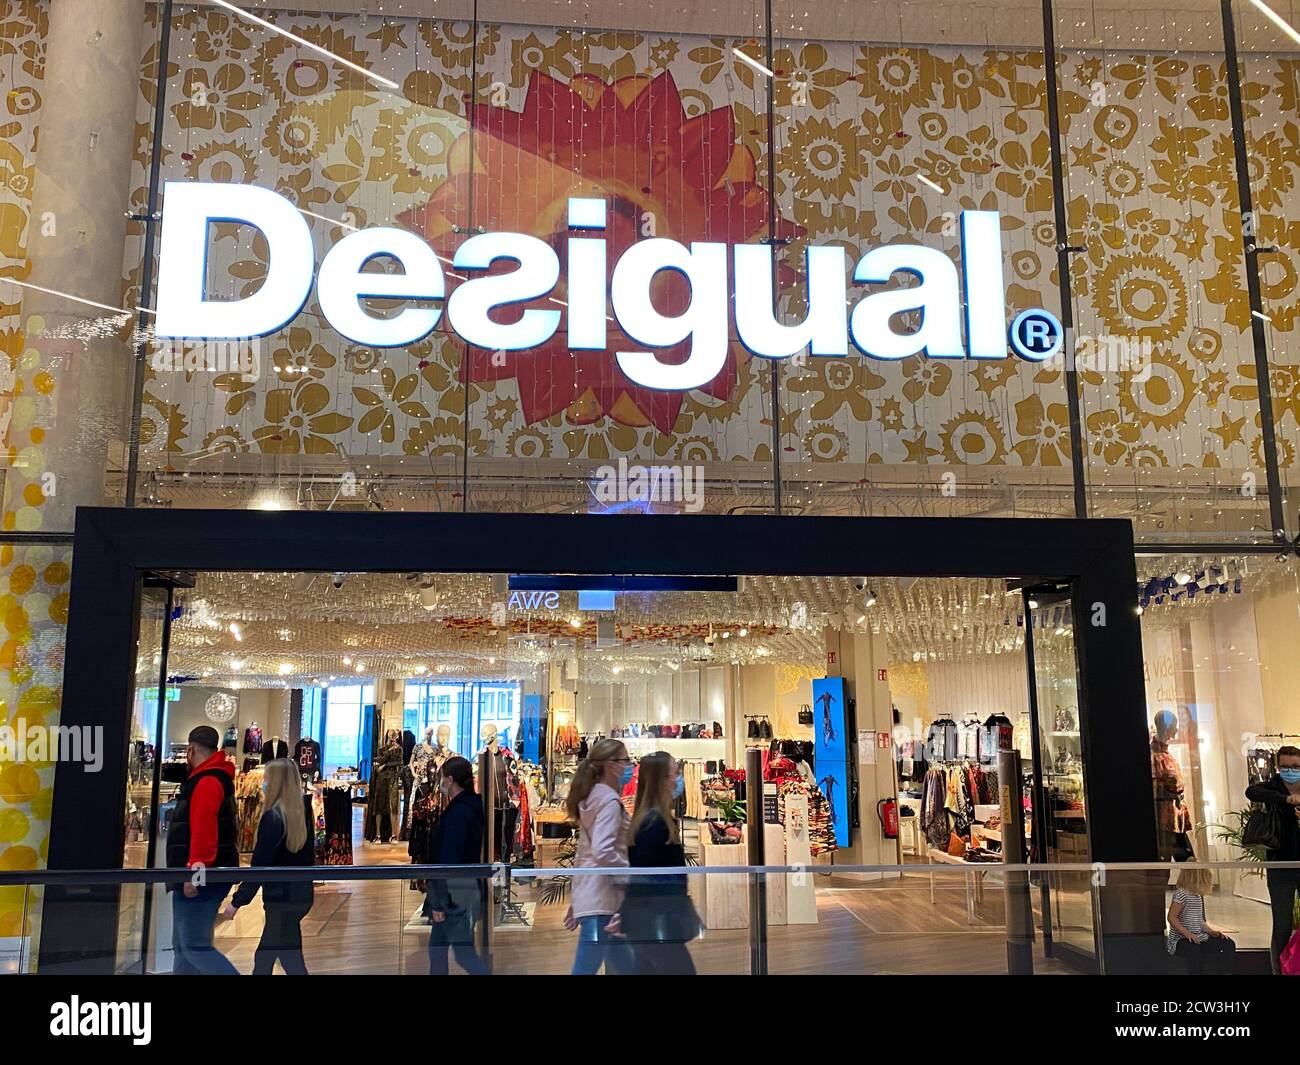 Desigual Logo High Resolution Stock Photography and Images - Alamy